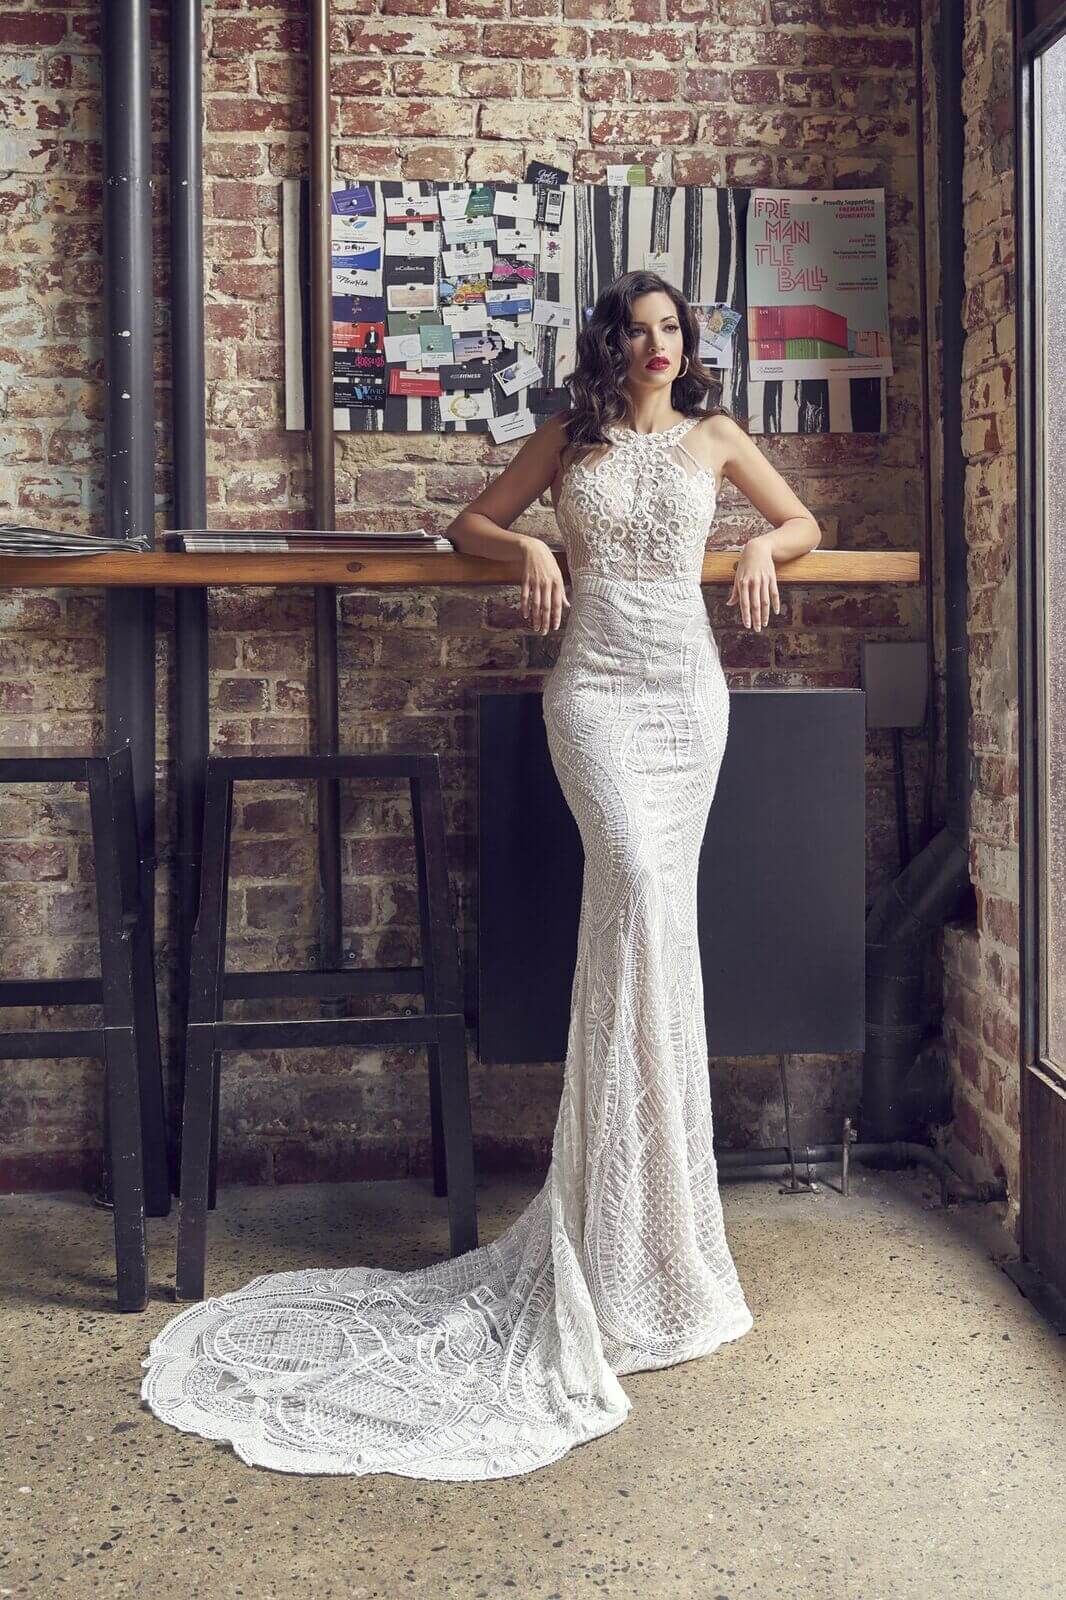 Model is wearing a 2022 Bridal Gown by Top Wedding Dresses Designer ZAVANA, Style Number ZB218, available at Romantique Bridal, Magherafelt Northern Ireland